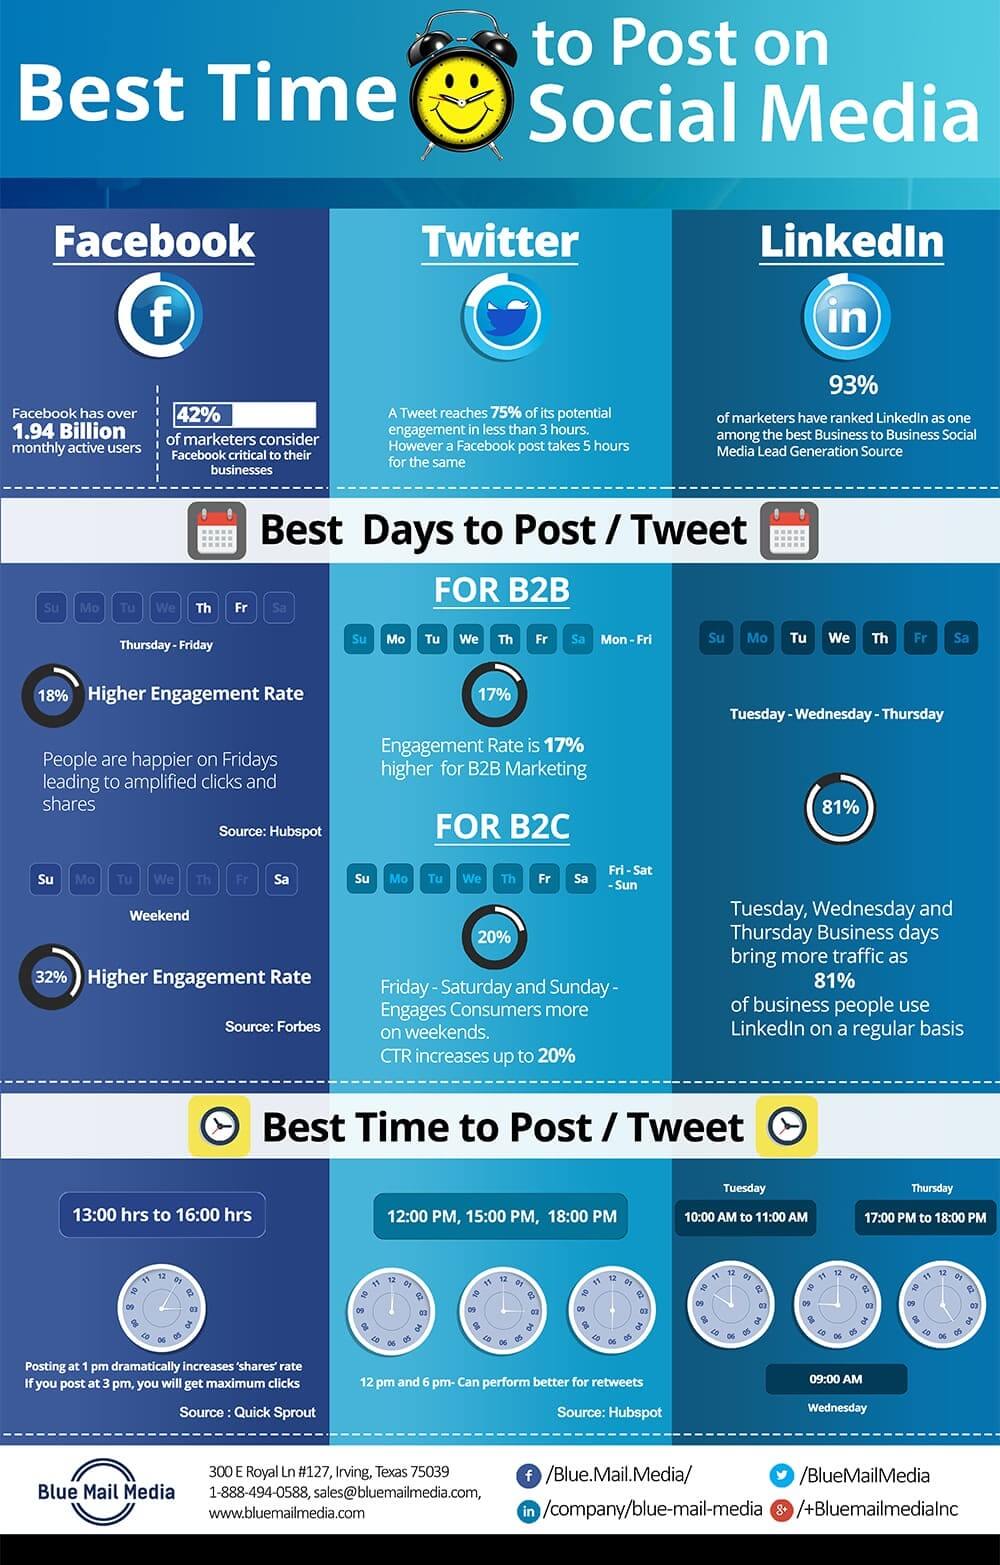 Best Time To Post On Social Media